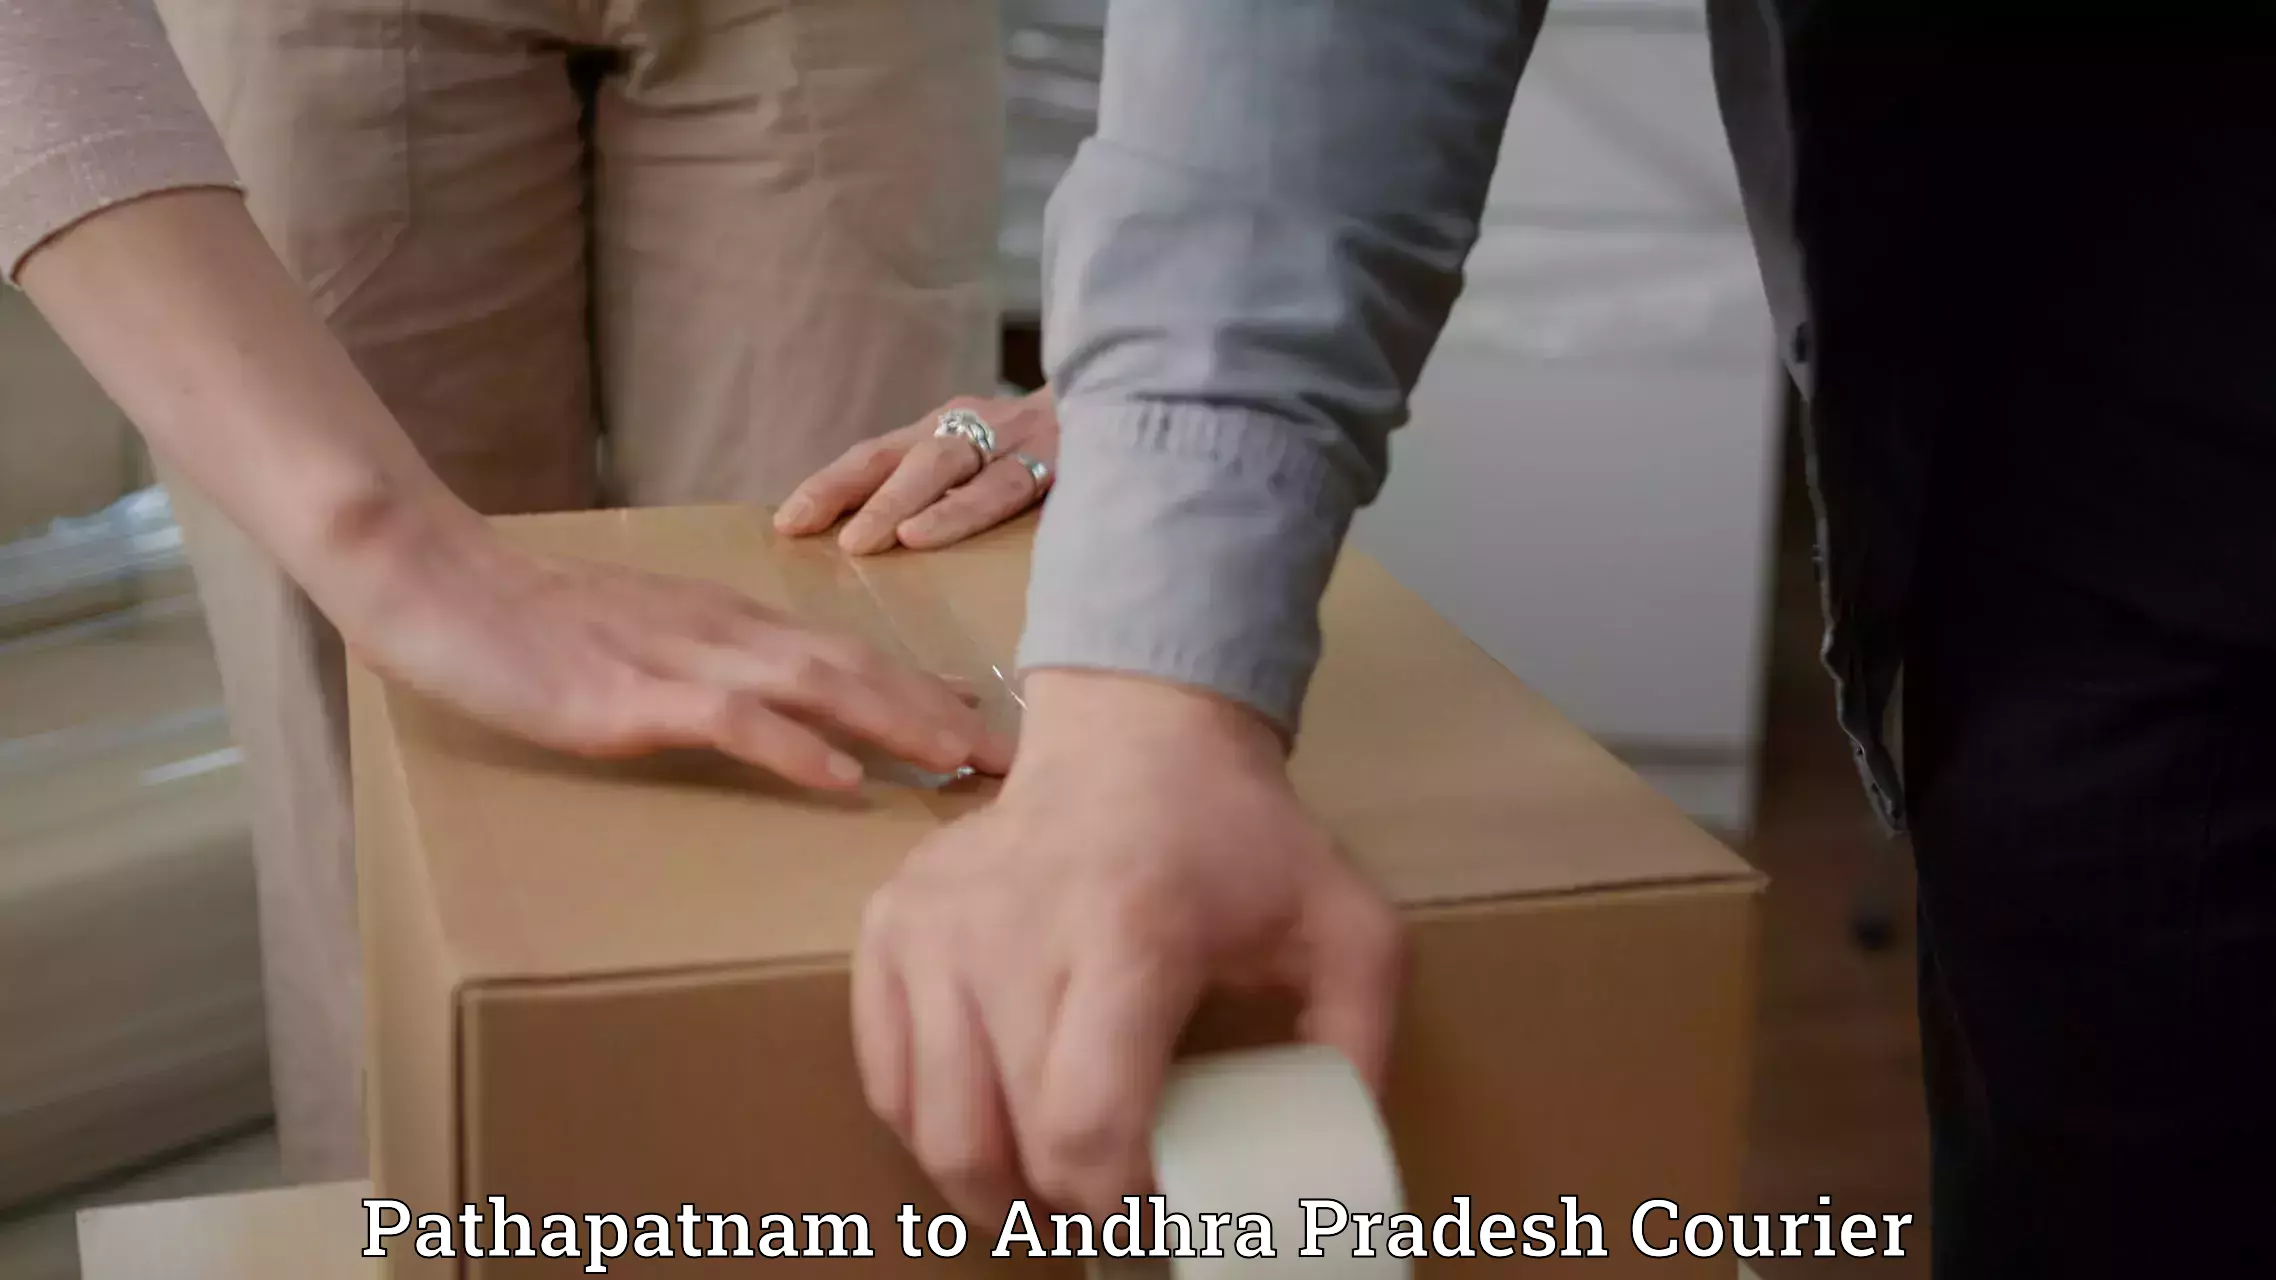 User-friendly courier app Pathapatnam to Visakhapatnam Port